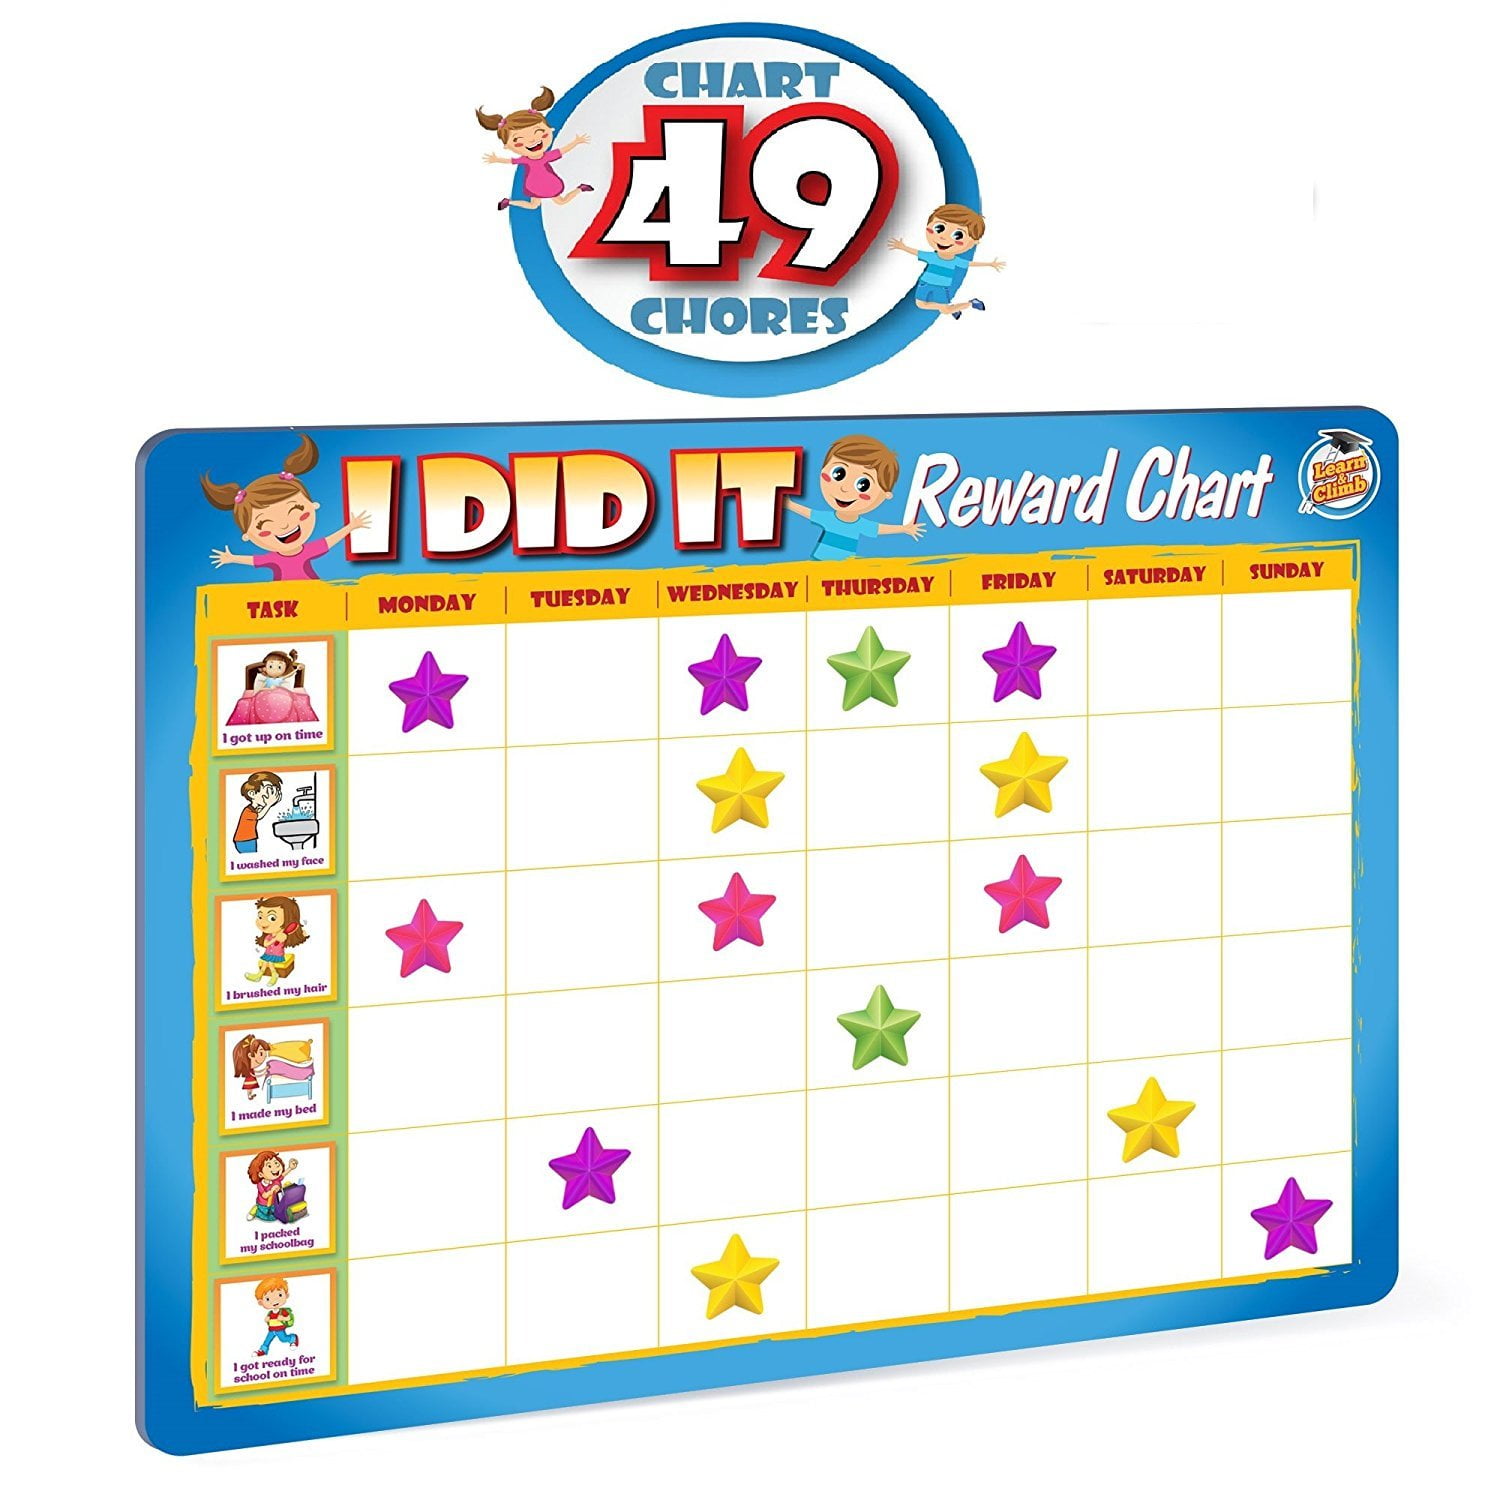 Star Reward Chart For kids Daily Routine Chores MAGNETIC Space Themed Encourage Good Behaviour